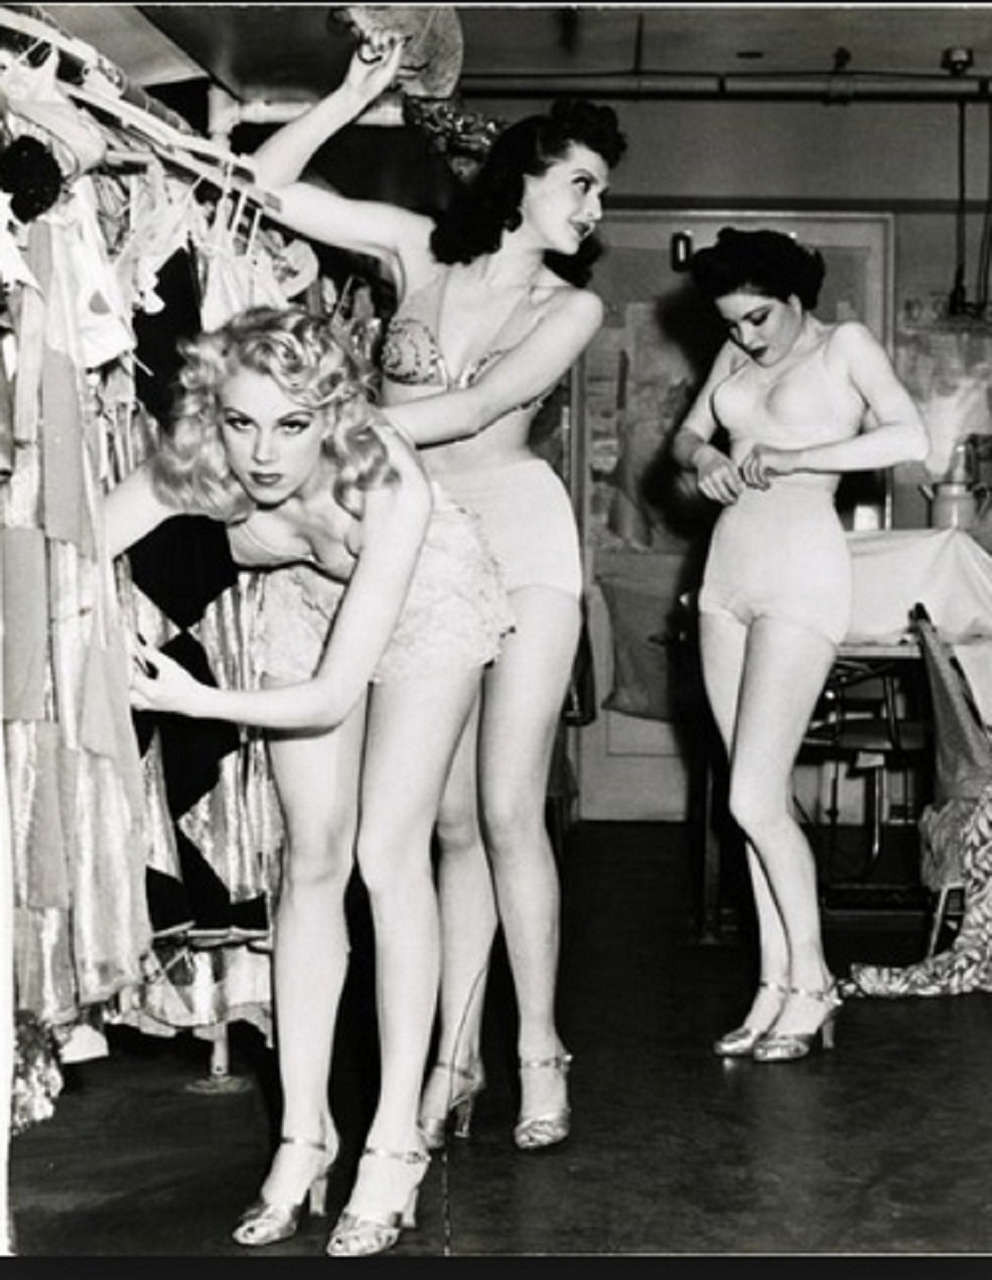 Backstage At The Earl Carroll Vanities Burlesque Show New York City C 1940s NSF